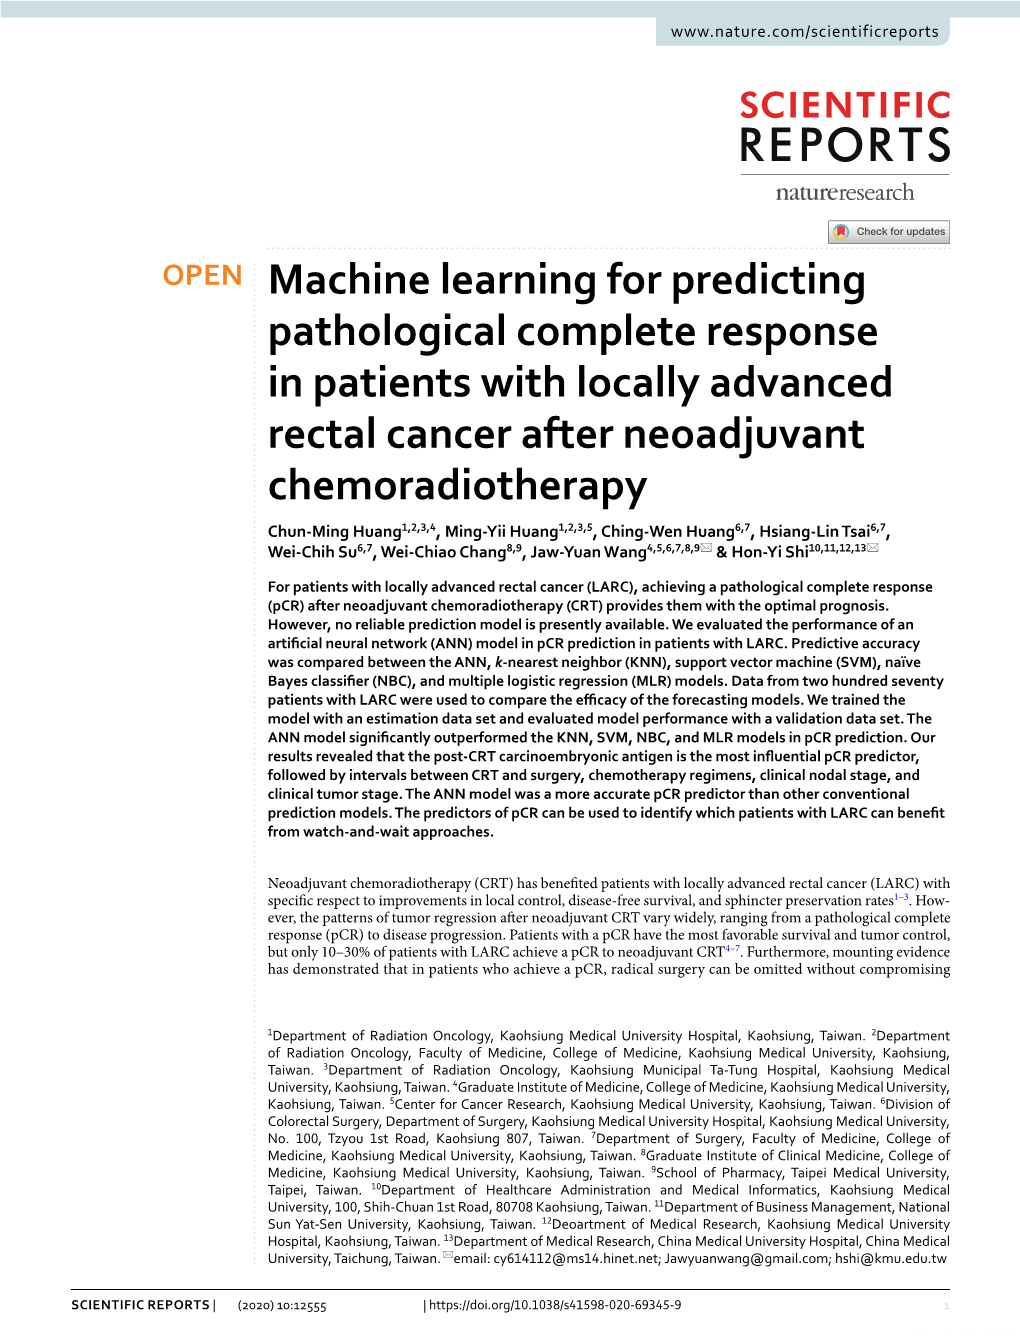 Machine Learning for Predicting Pathological Complete Response In